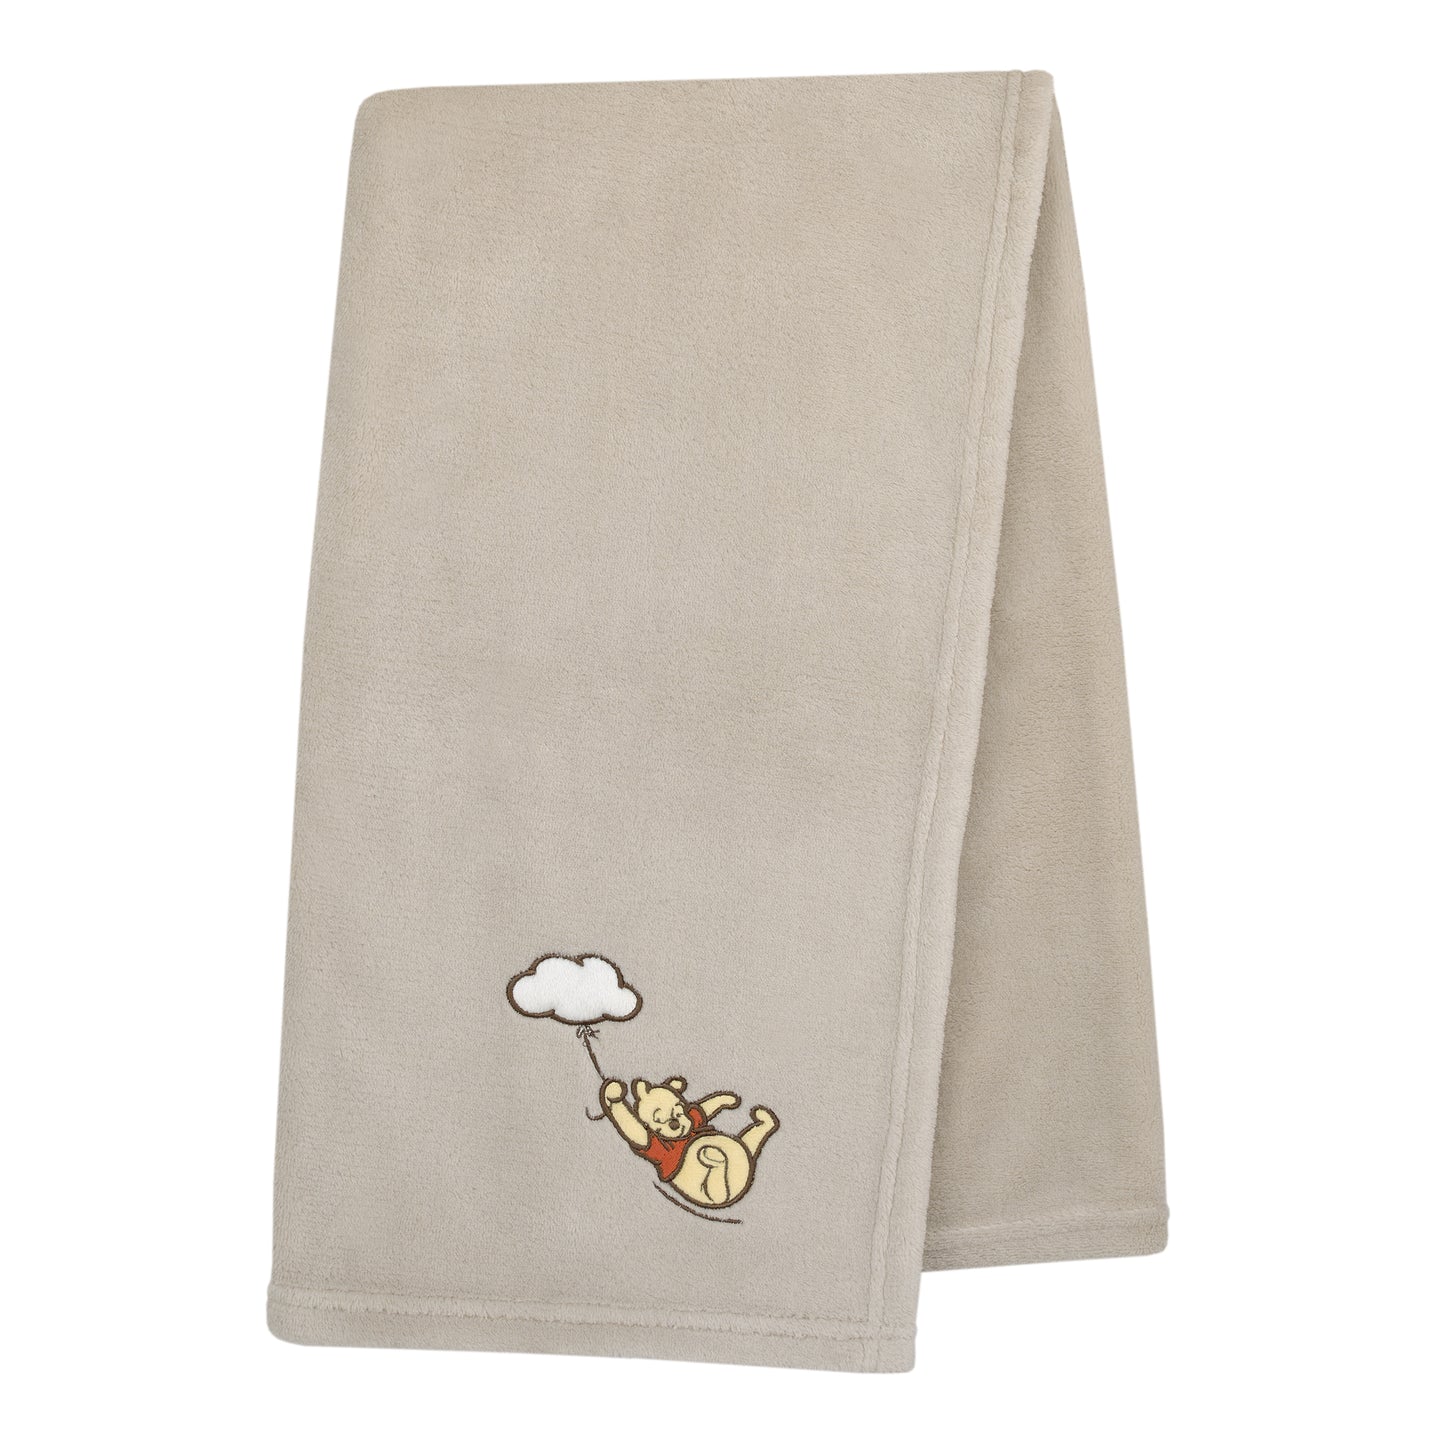 Disney Winnie the Pooh - Blustery Day Grey Cloud Super Soft Baby Blanket with Applique